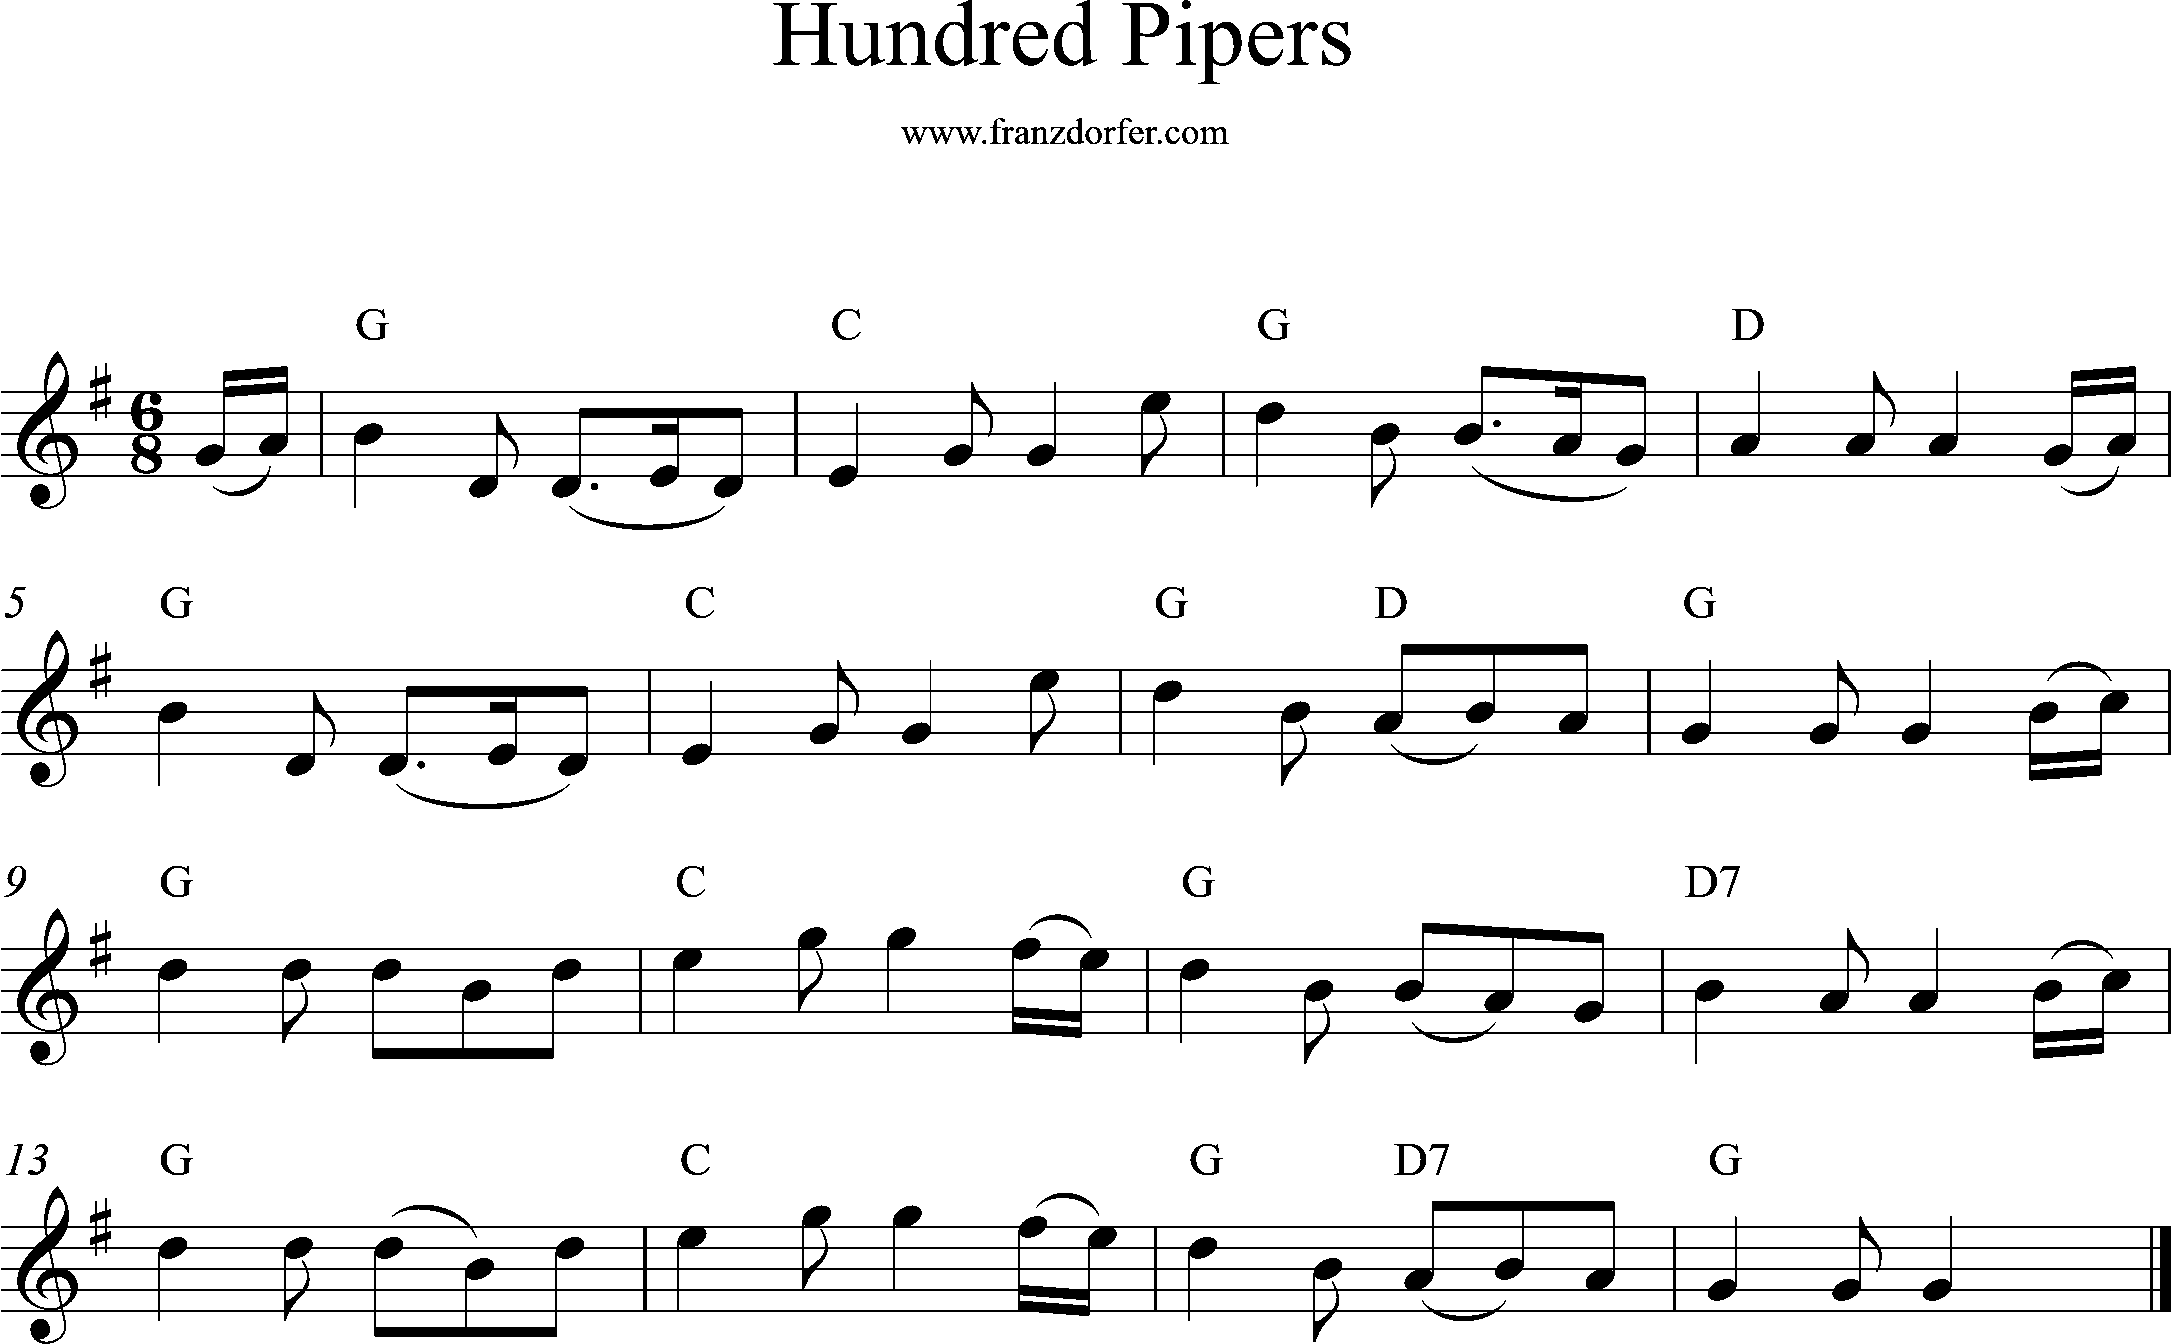 sheetmusic for Trumet- 100 Pipers